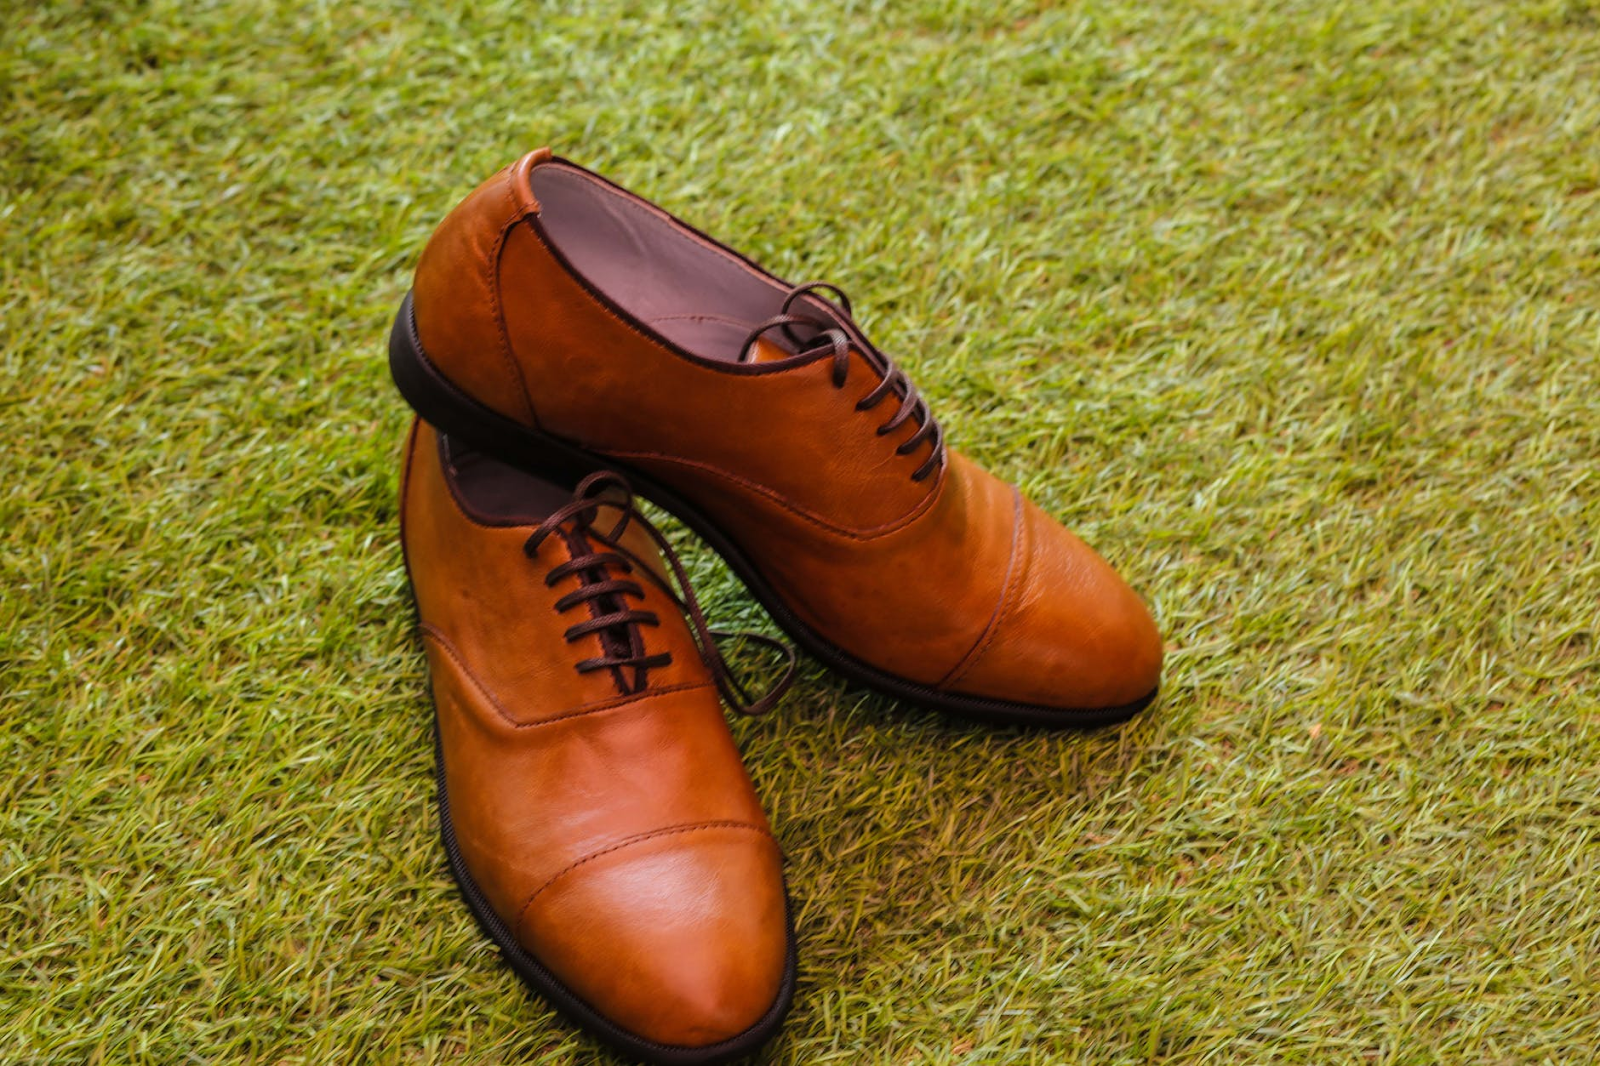 Oxford is one type of men's shoe that you need